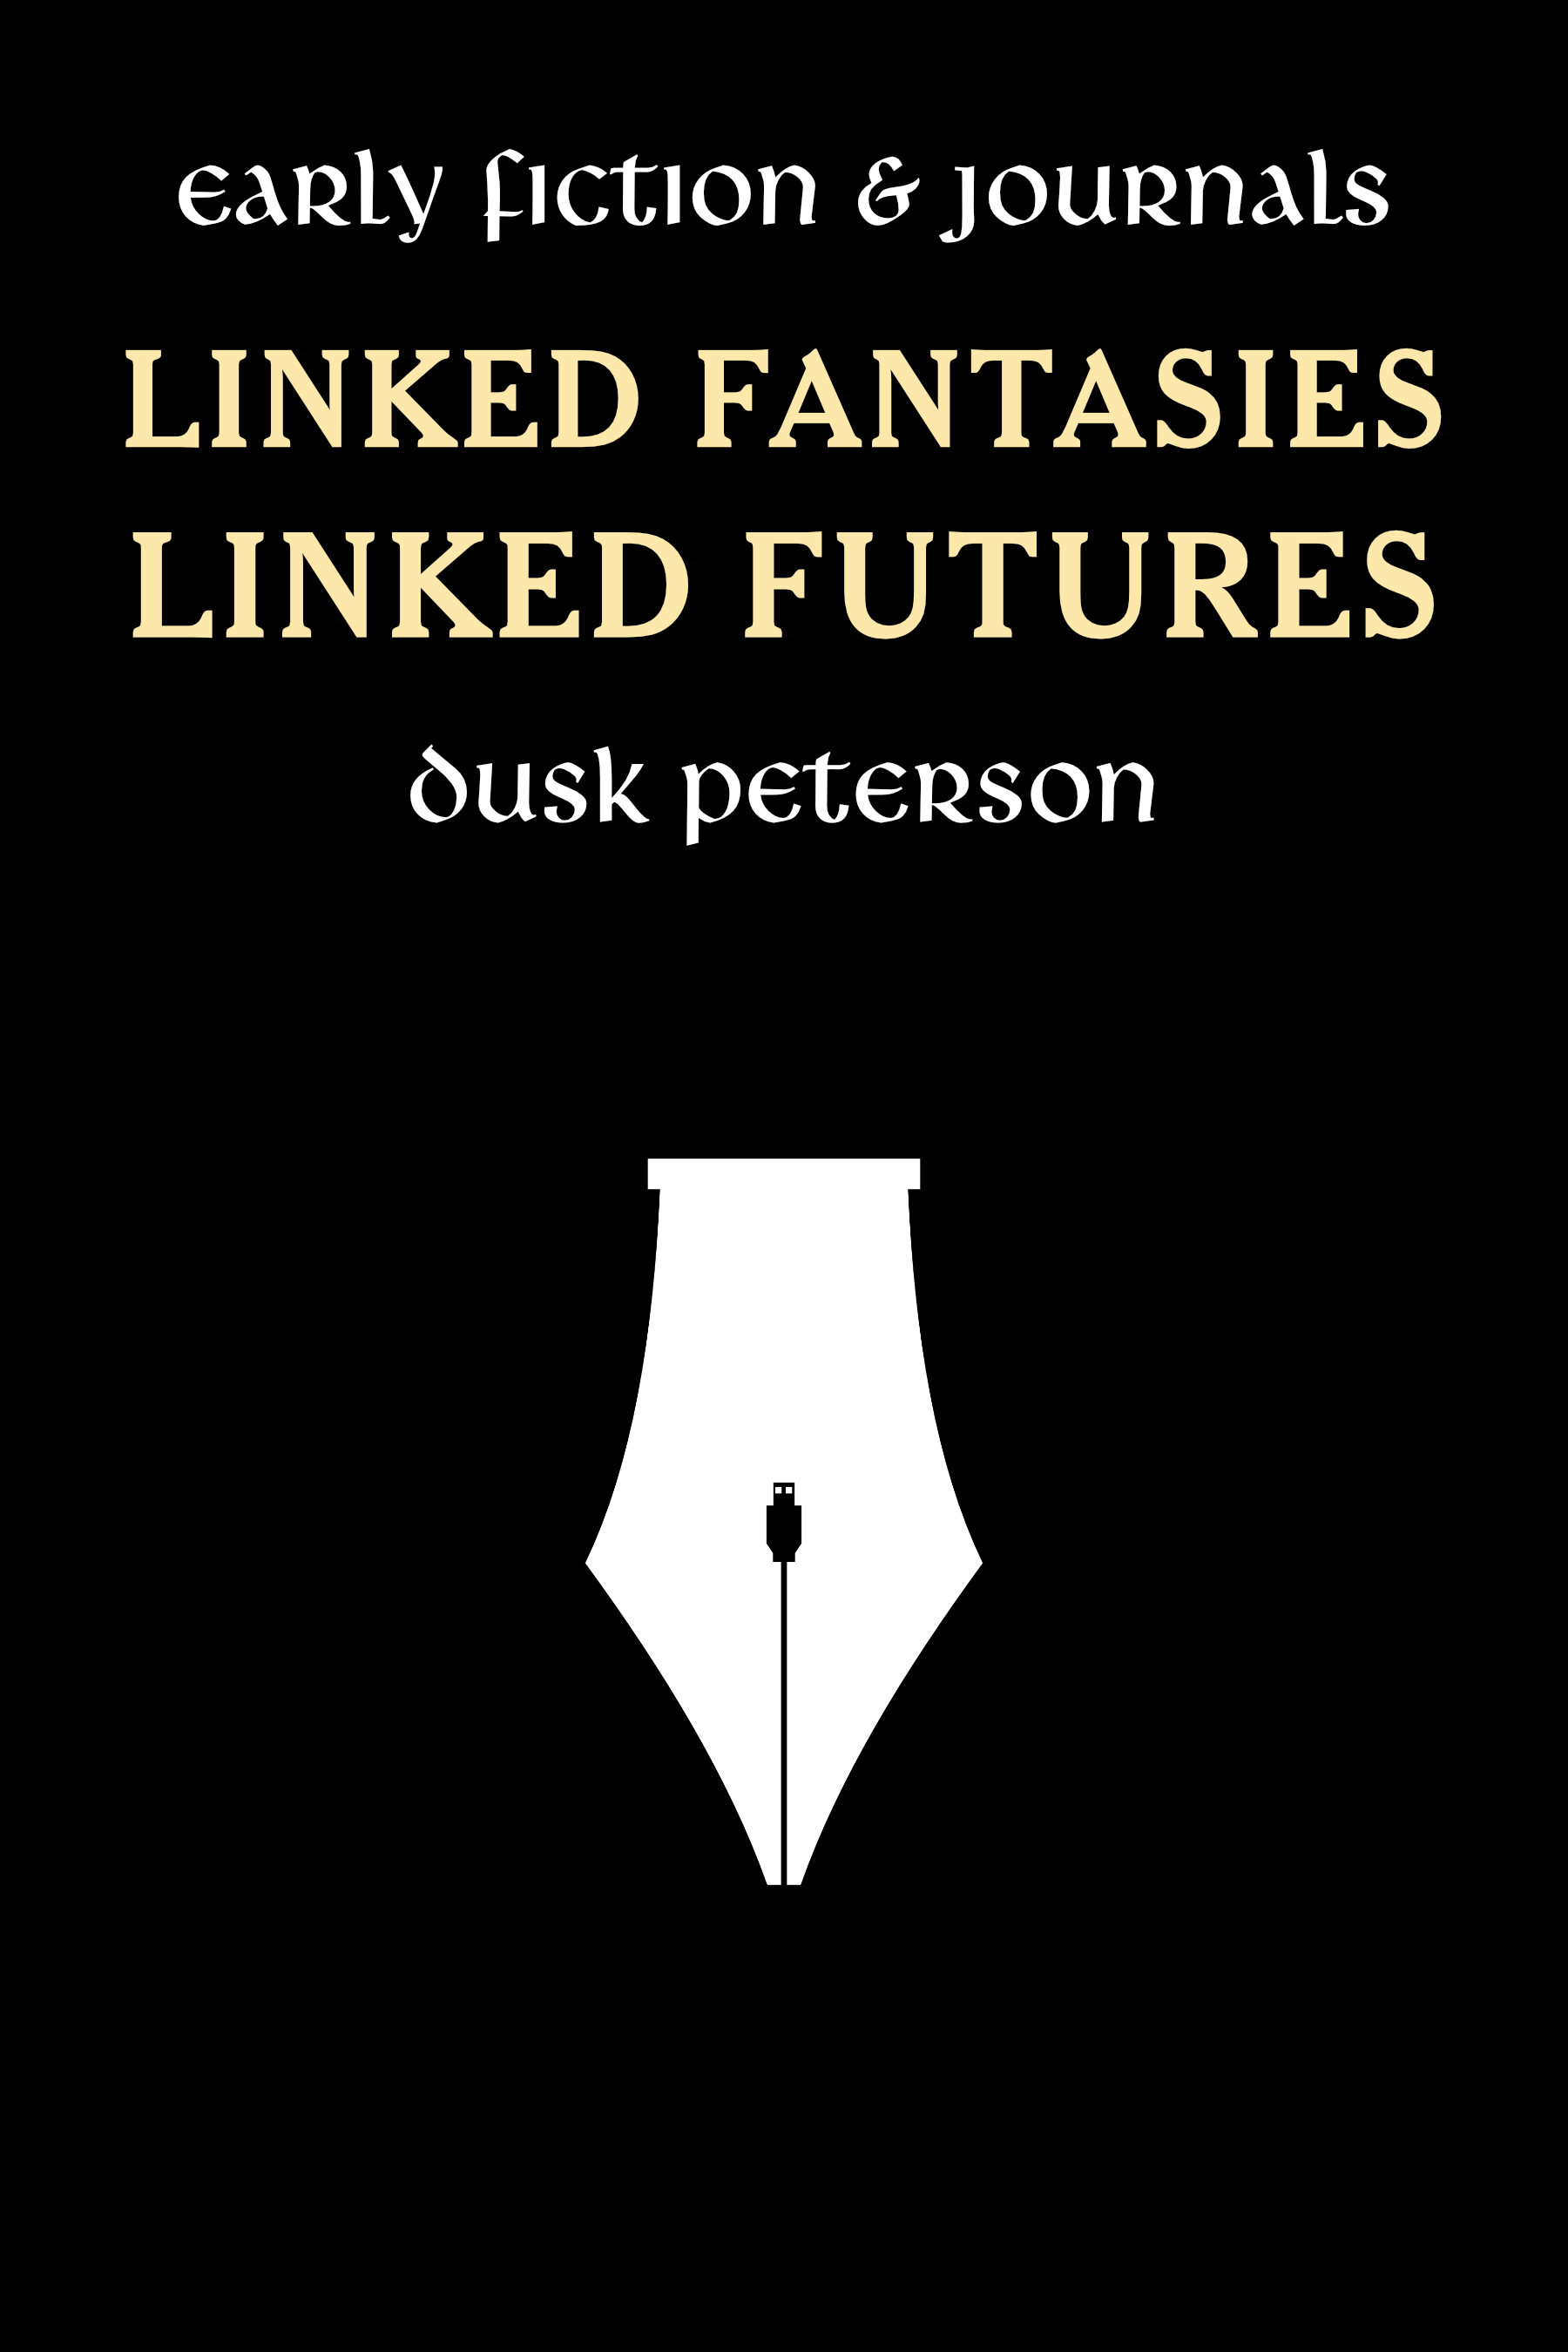 Linked Fantasies, Linked Futures: Early Fiction & Journals